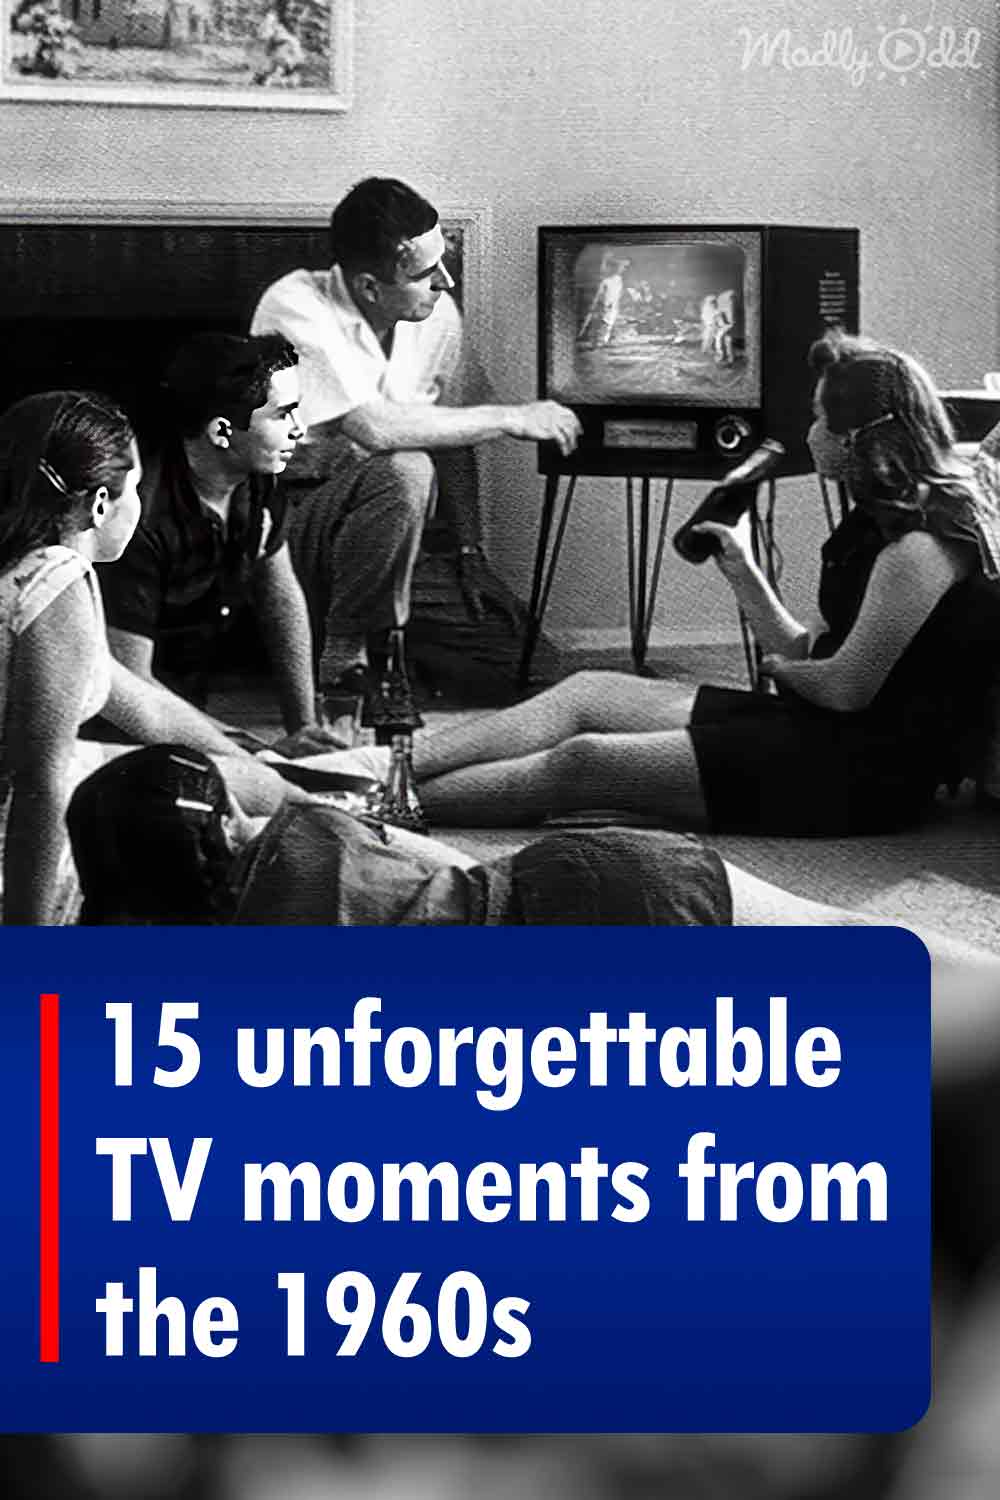 15 unforgettable TV moments from the 1960s